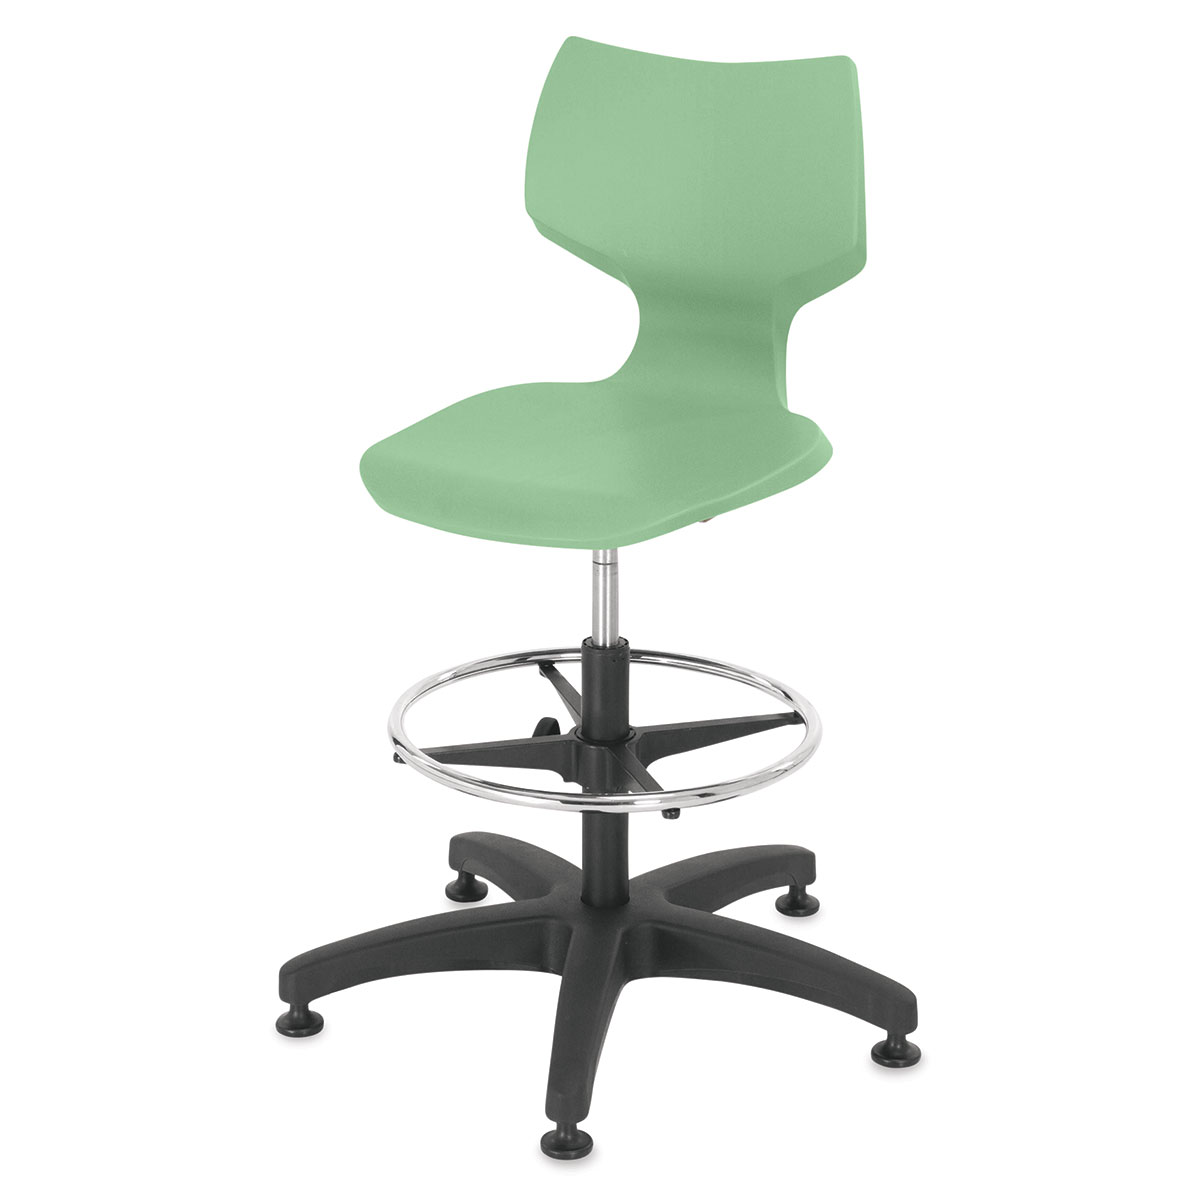 Smith System Flavors Adjustable Stool - Mint, with Gliders